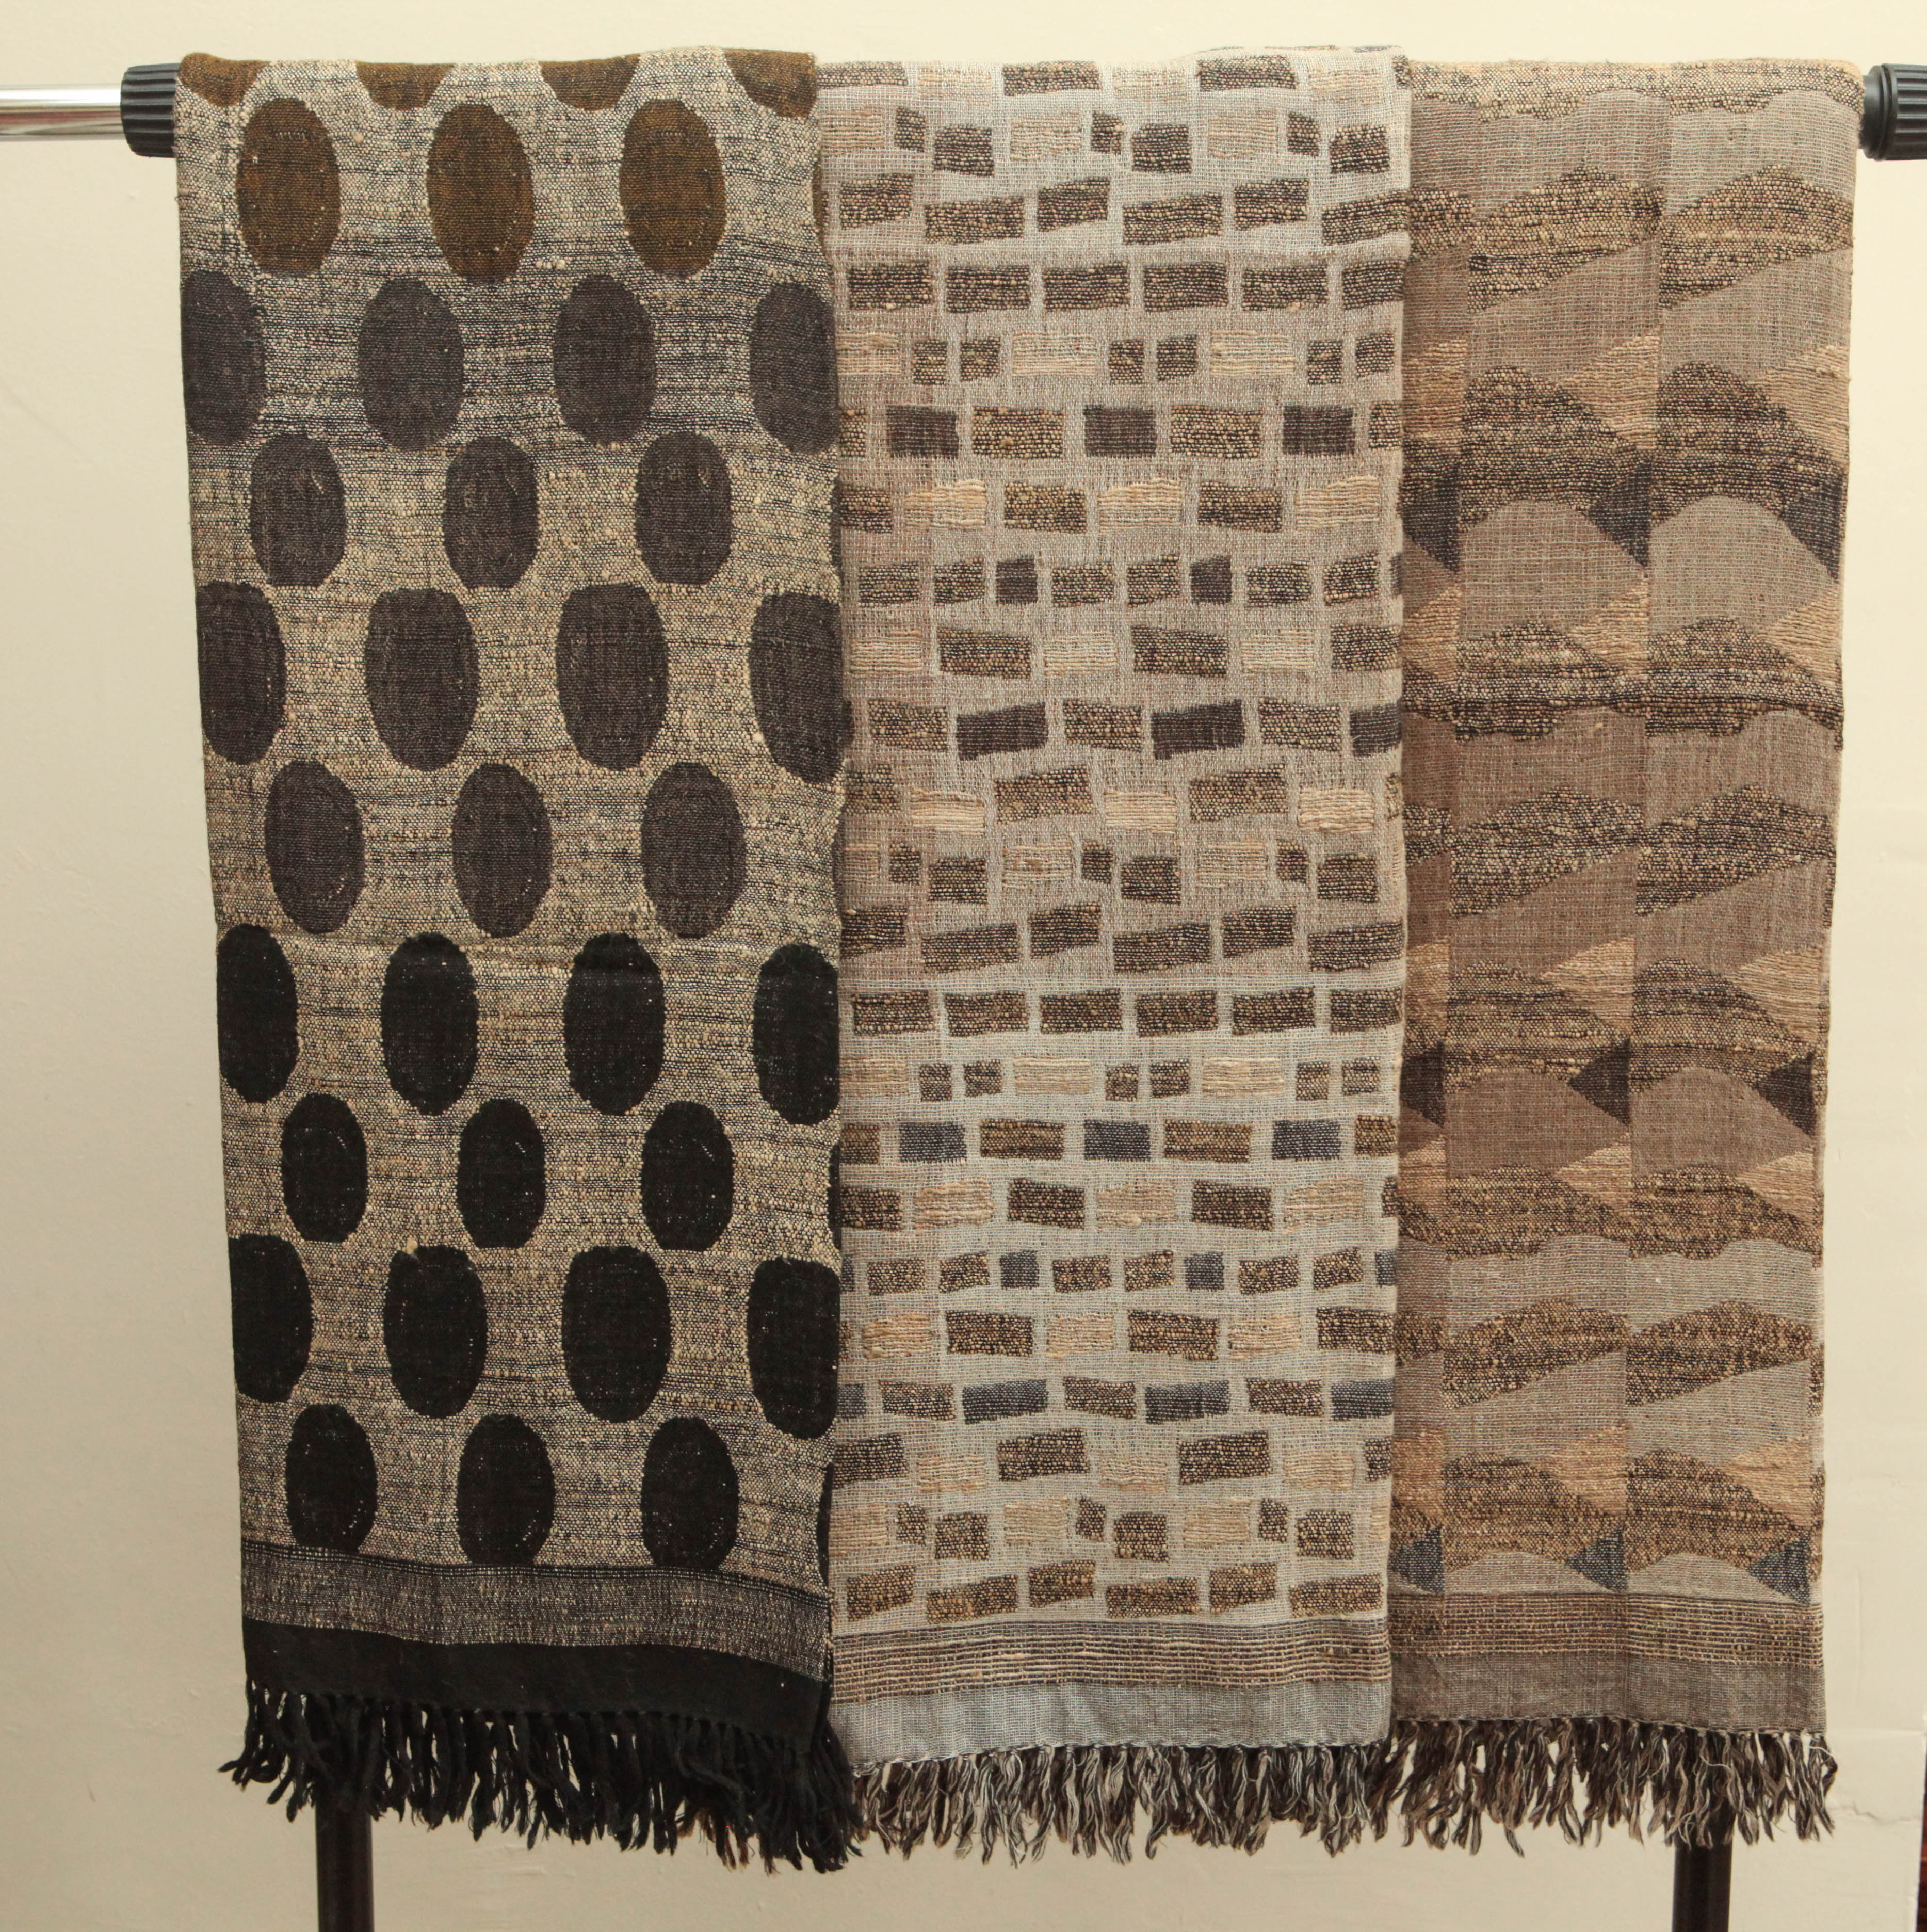 Indian Hand Woven Throws.  Black, Brown, Gray, Beige.  Wool and Raw Silk.  For Sale